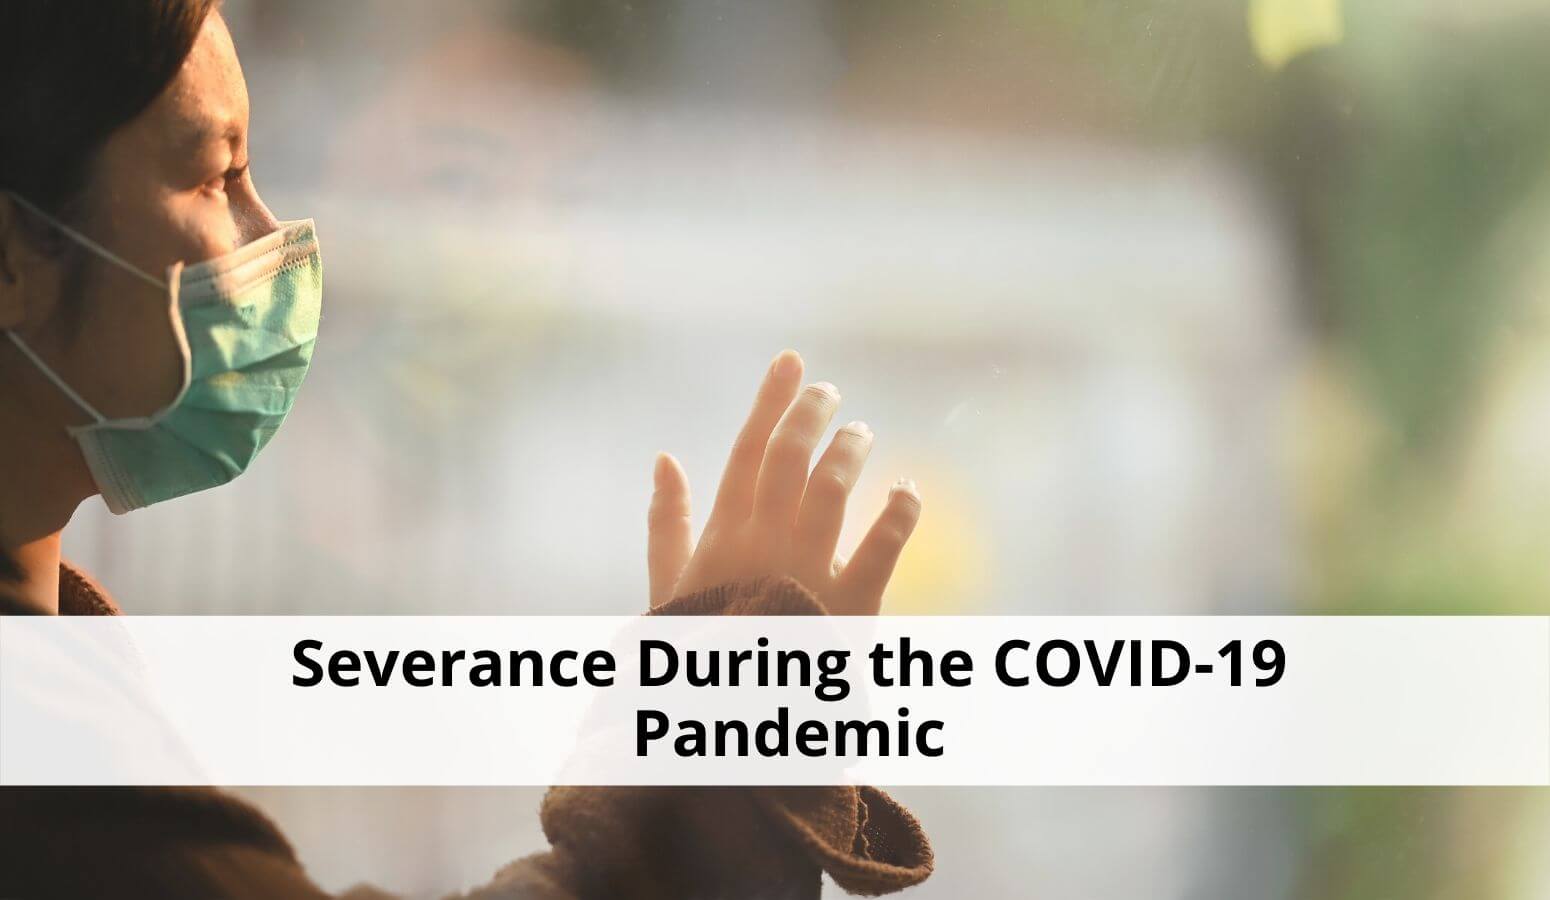 Featured image for “FIRED: Am I Entitled to a Longer Notice Period (Severance) During the COVID-19 Pandemic?”